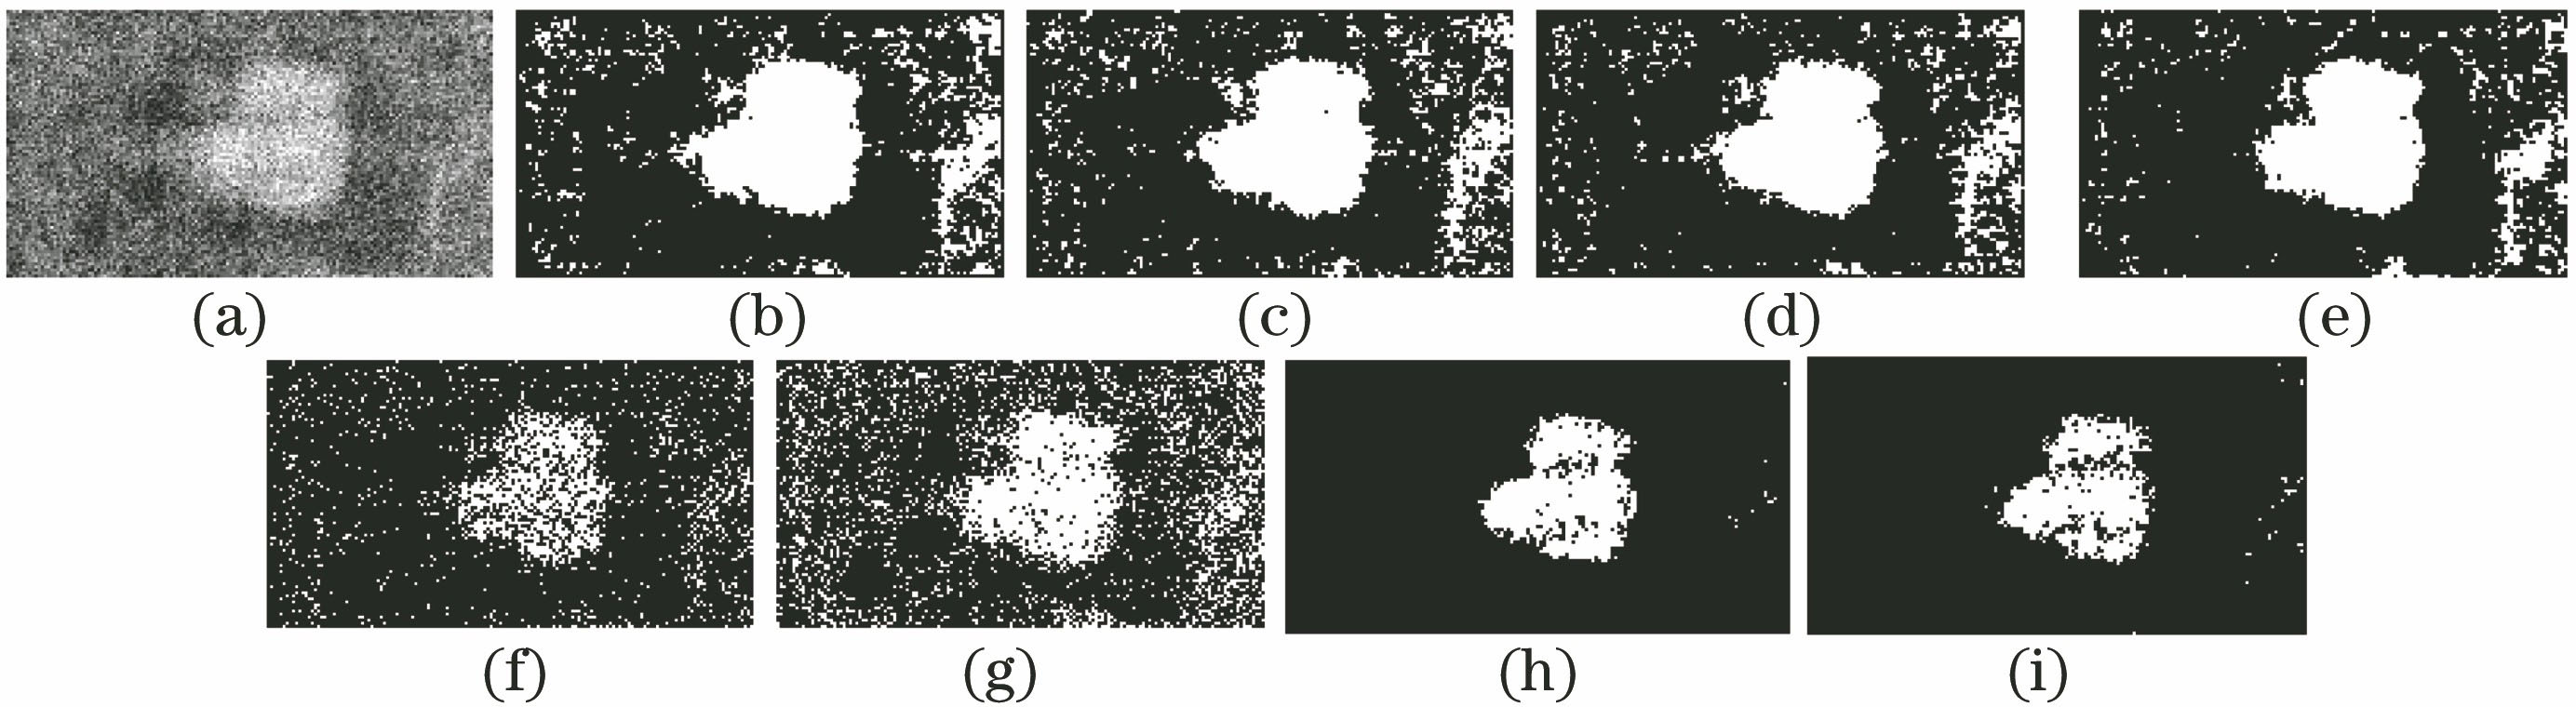 Segmentation results of different algorithms on #NDT1 image. (a) Image with Gaussian noise (0, 0.02); (b) FCM_S1 algorithm; (c) FCM_S2 algorithm; (d) EnFCM algorithm; (e) FGFCM algorithm; (f) algorithm in Ref. [20]; (g) algorithm in Ref. [21]; (h) IFCM_S1 algorithm; (i) IFCM_S2 algorithm